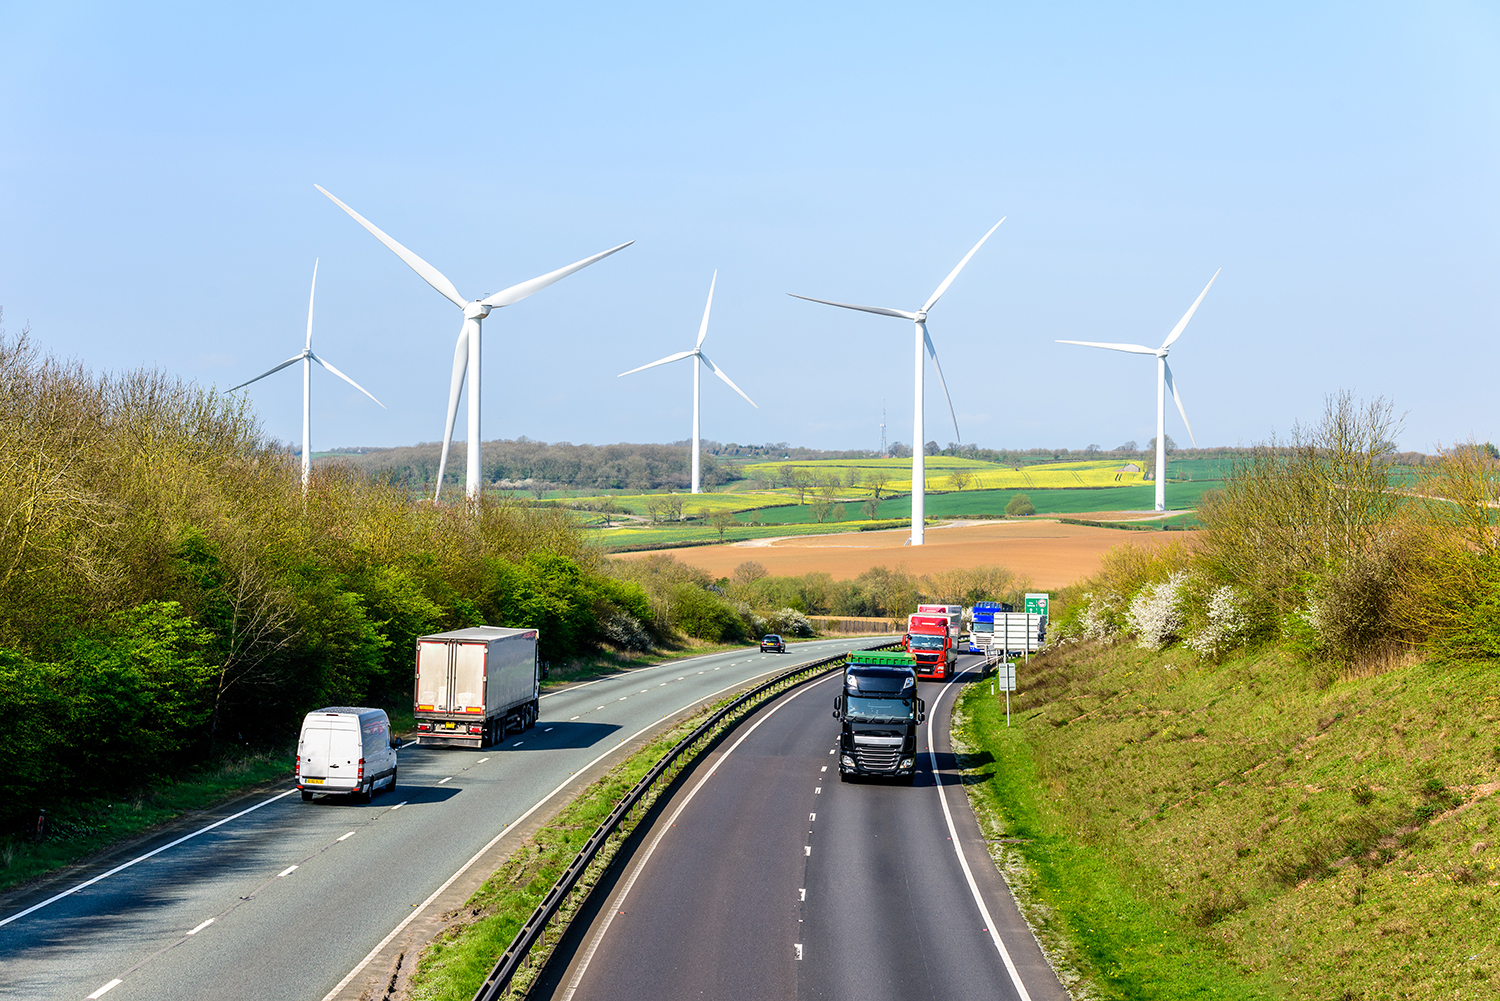 Large onshore wind turbines rely on yaw brakes to keep their blades facing into the wind. (Image Source: AdobeStock_147397787)